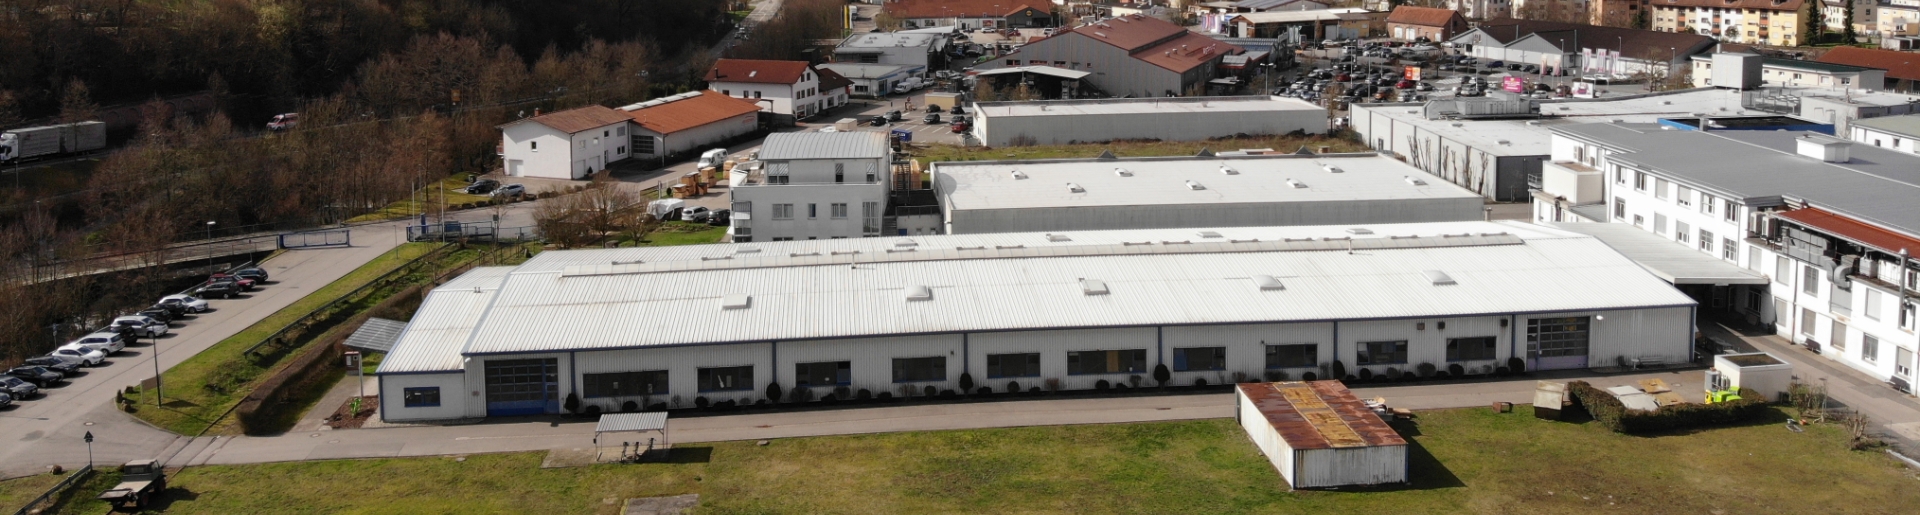 Aerial view of production hall of krauth technology GmbH